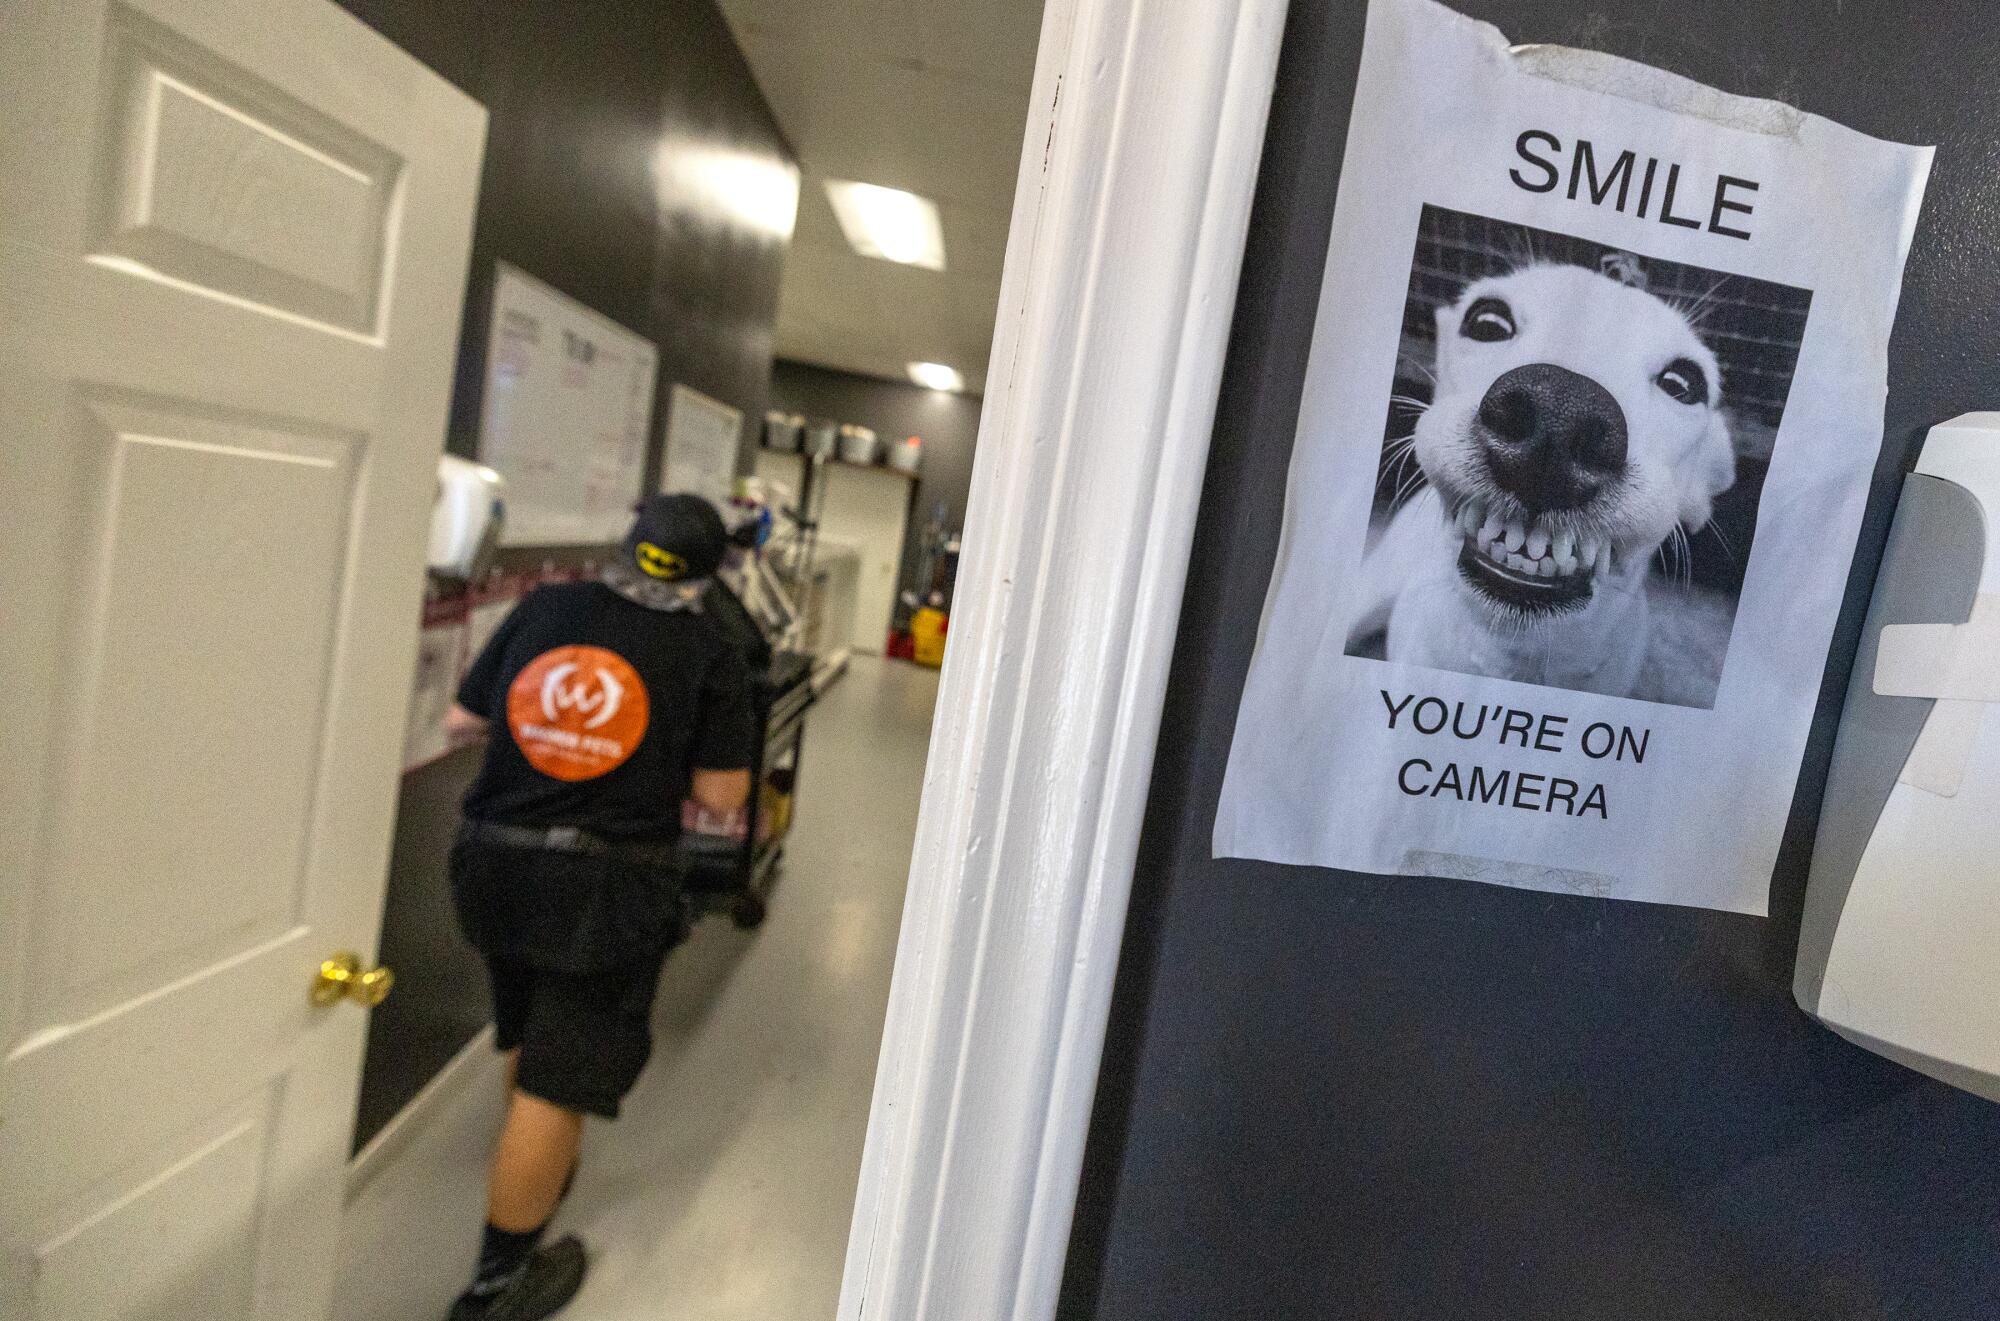 A poster on a door shows a dog and says, "Smile. You're on Camera"